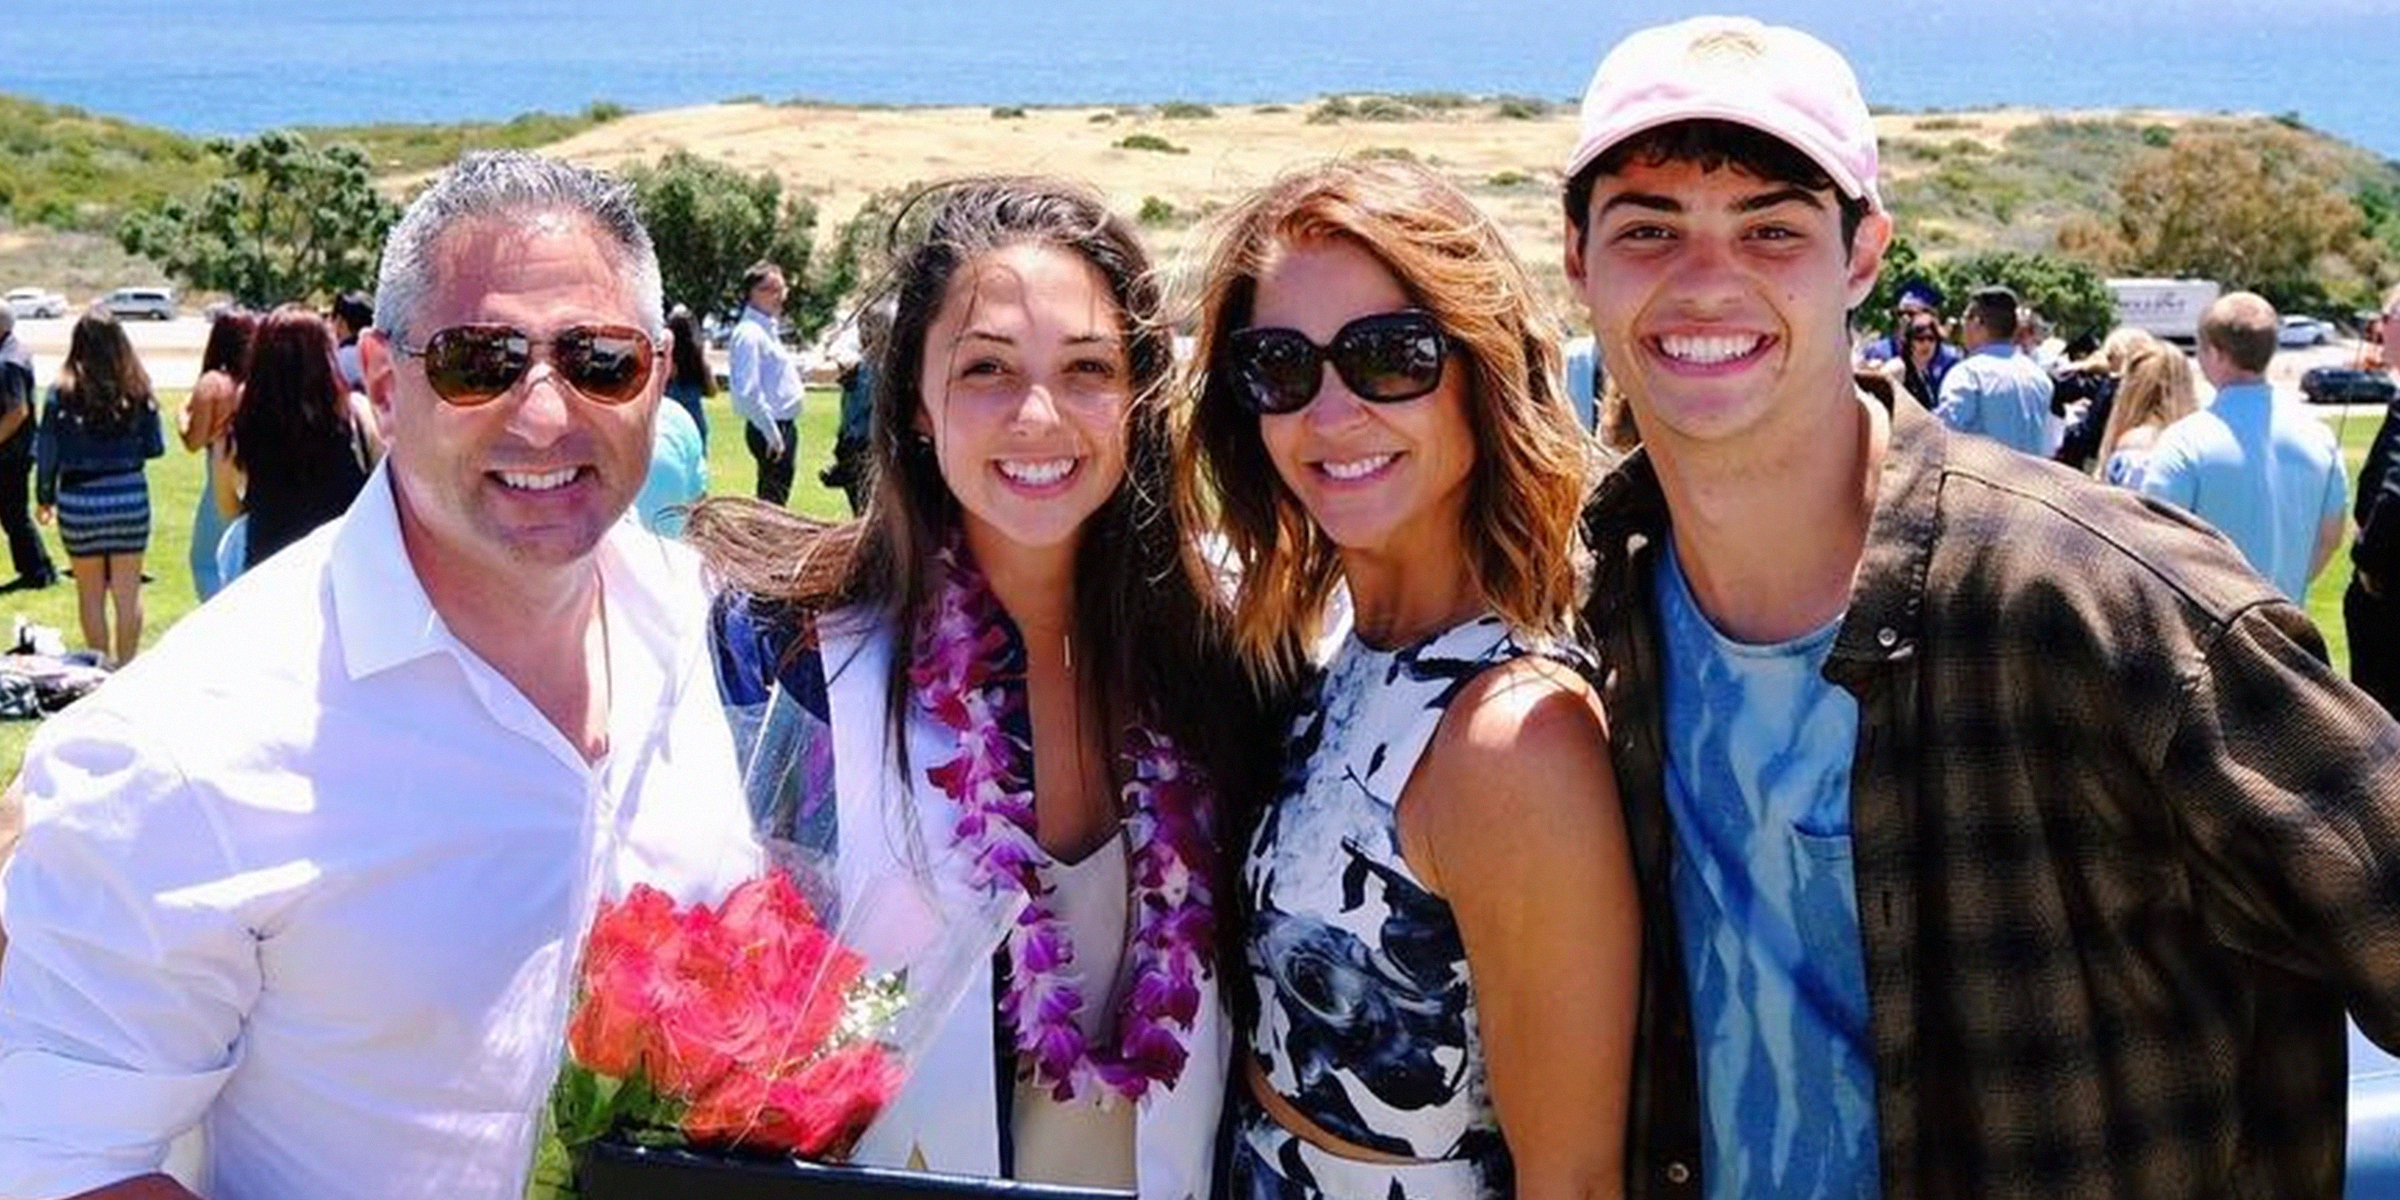 Taylor Centineo and Noah Centineo with their family | Source: Instagram/taycentineo